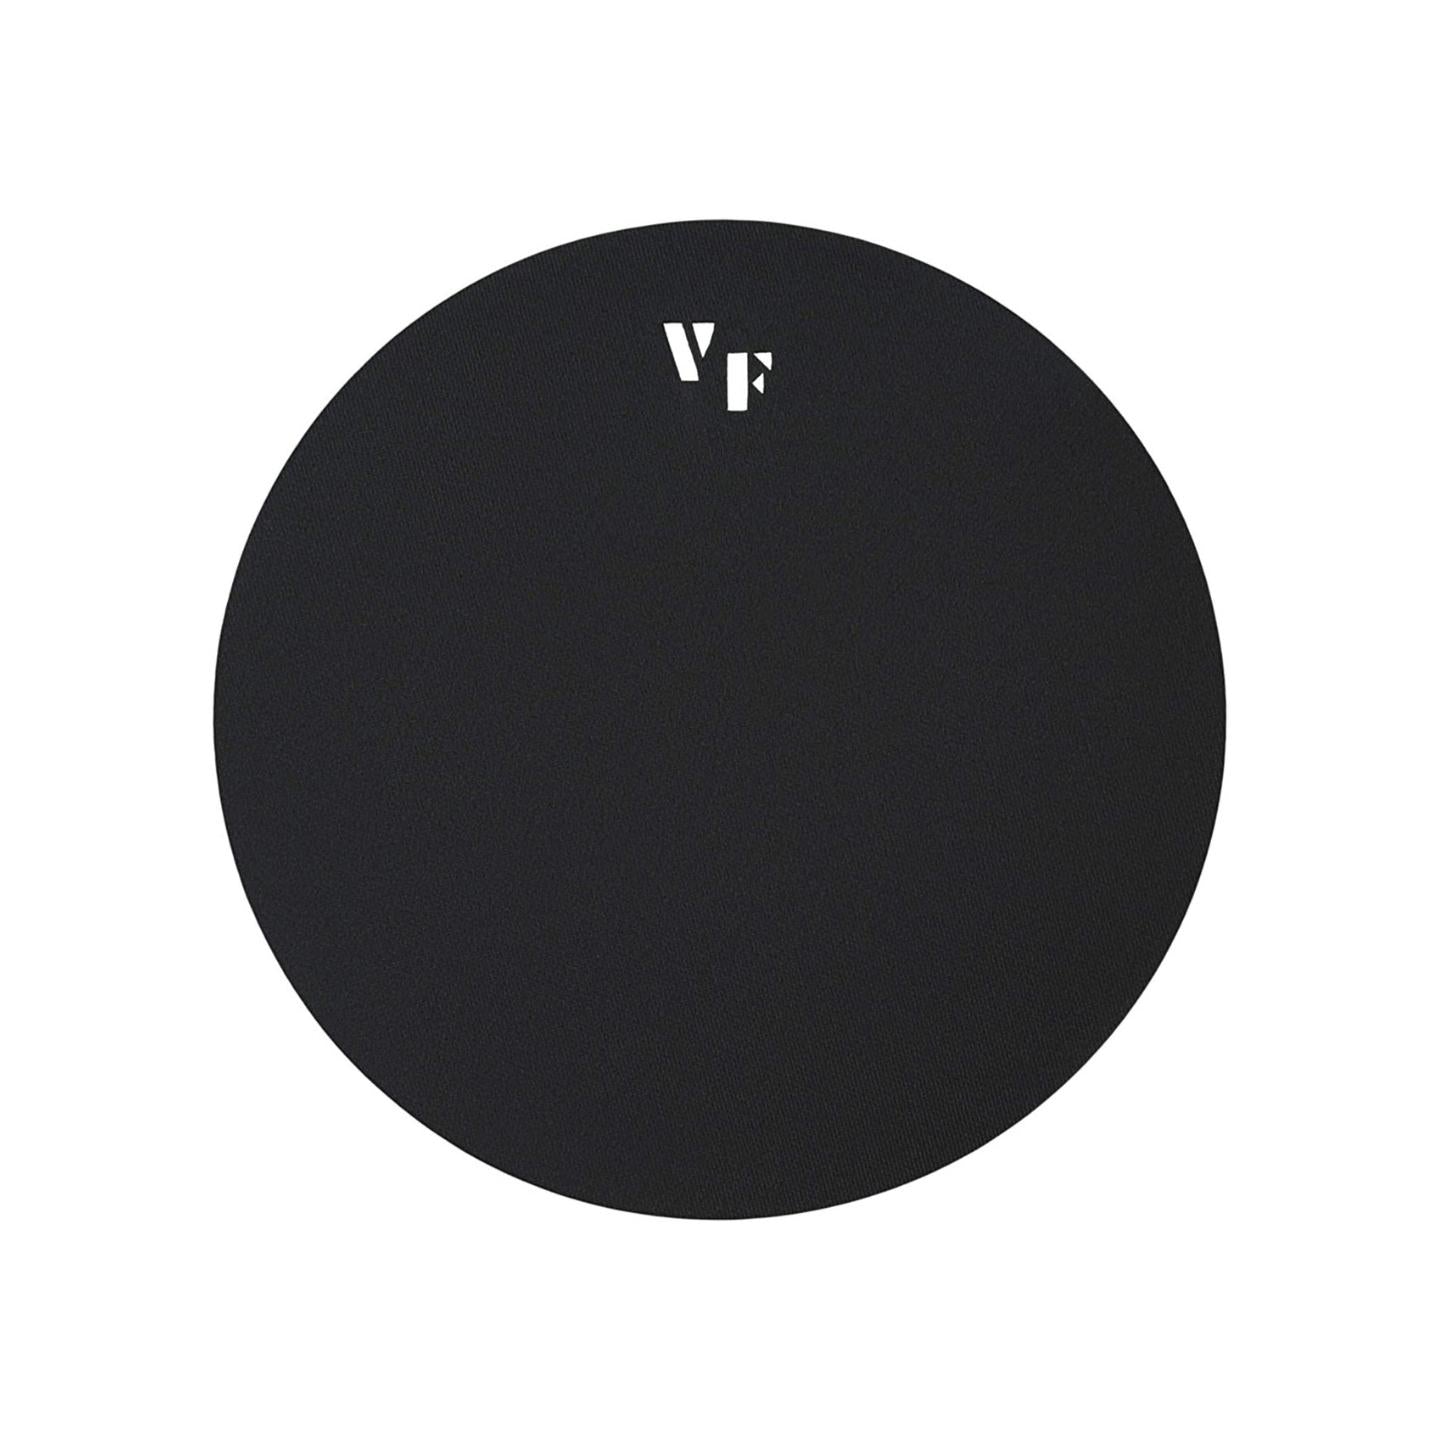 Vic Firth 14" Non Slip Rubber Drum Mute Compatible with Drumset, Concert Drums, Marching Drums